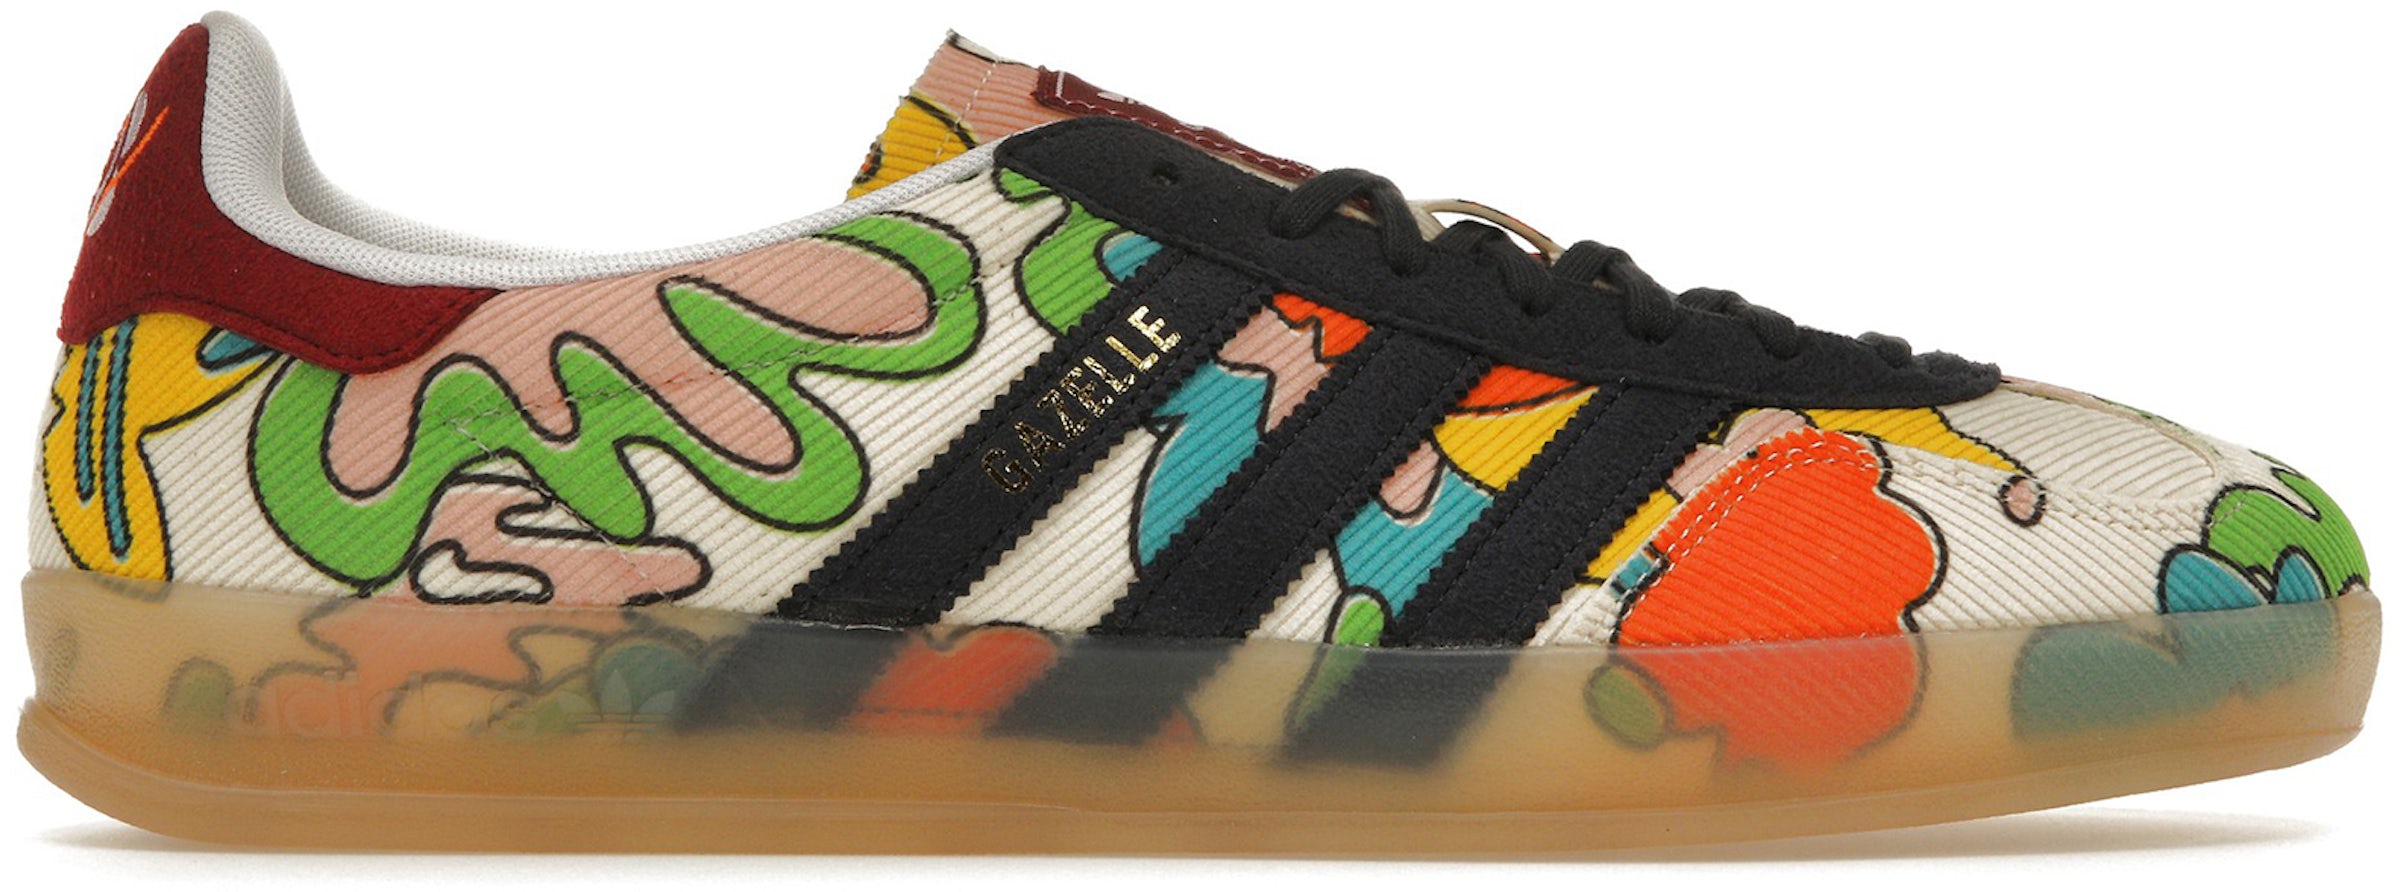 Buy adidas Gazelle Shoes Sneakers StockX New - 